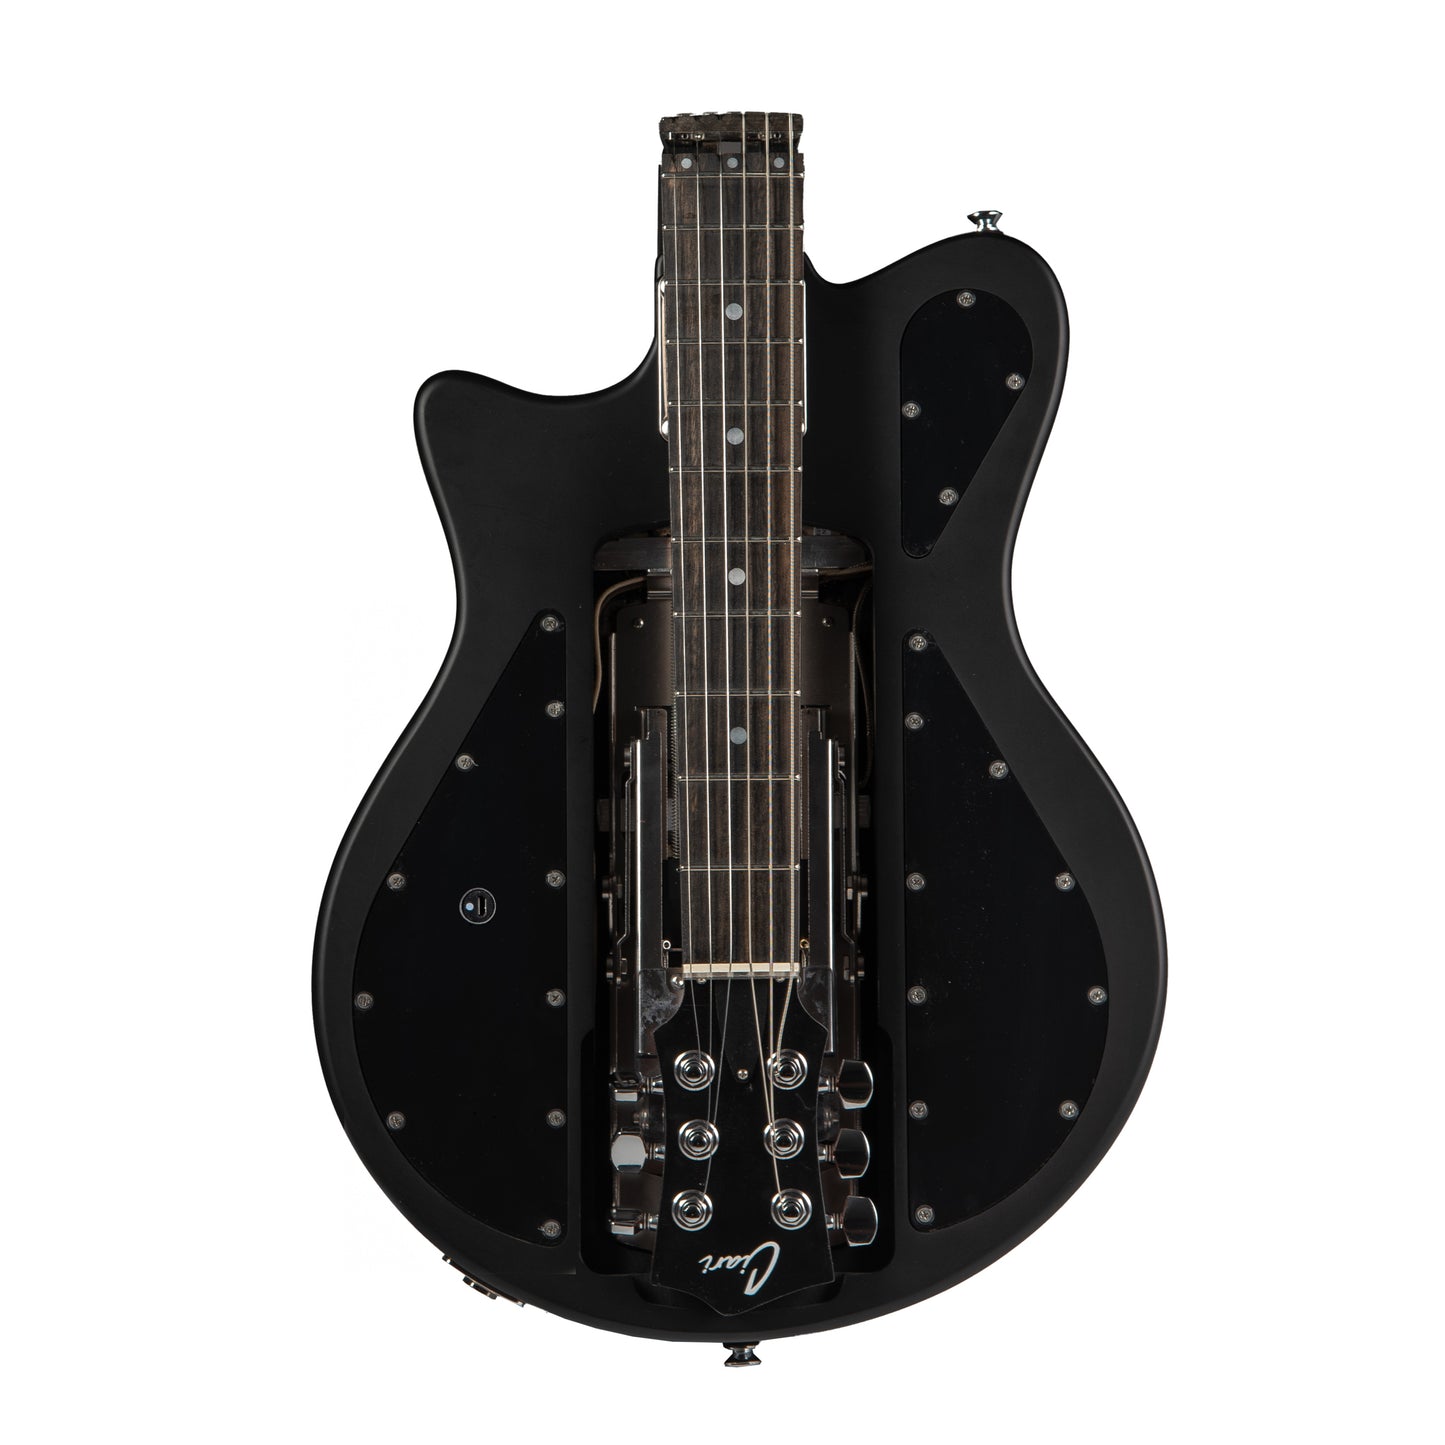 The Ascender™ P90 Duo™ FF Electric Guitar in Black